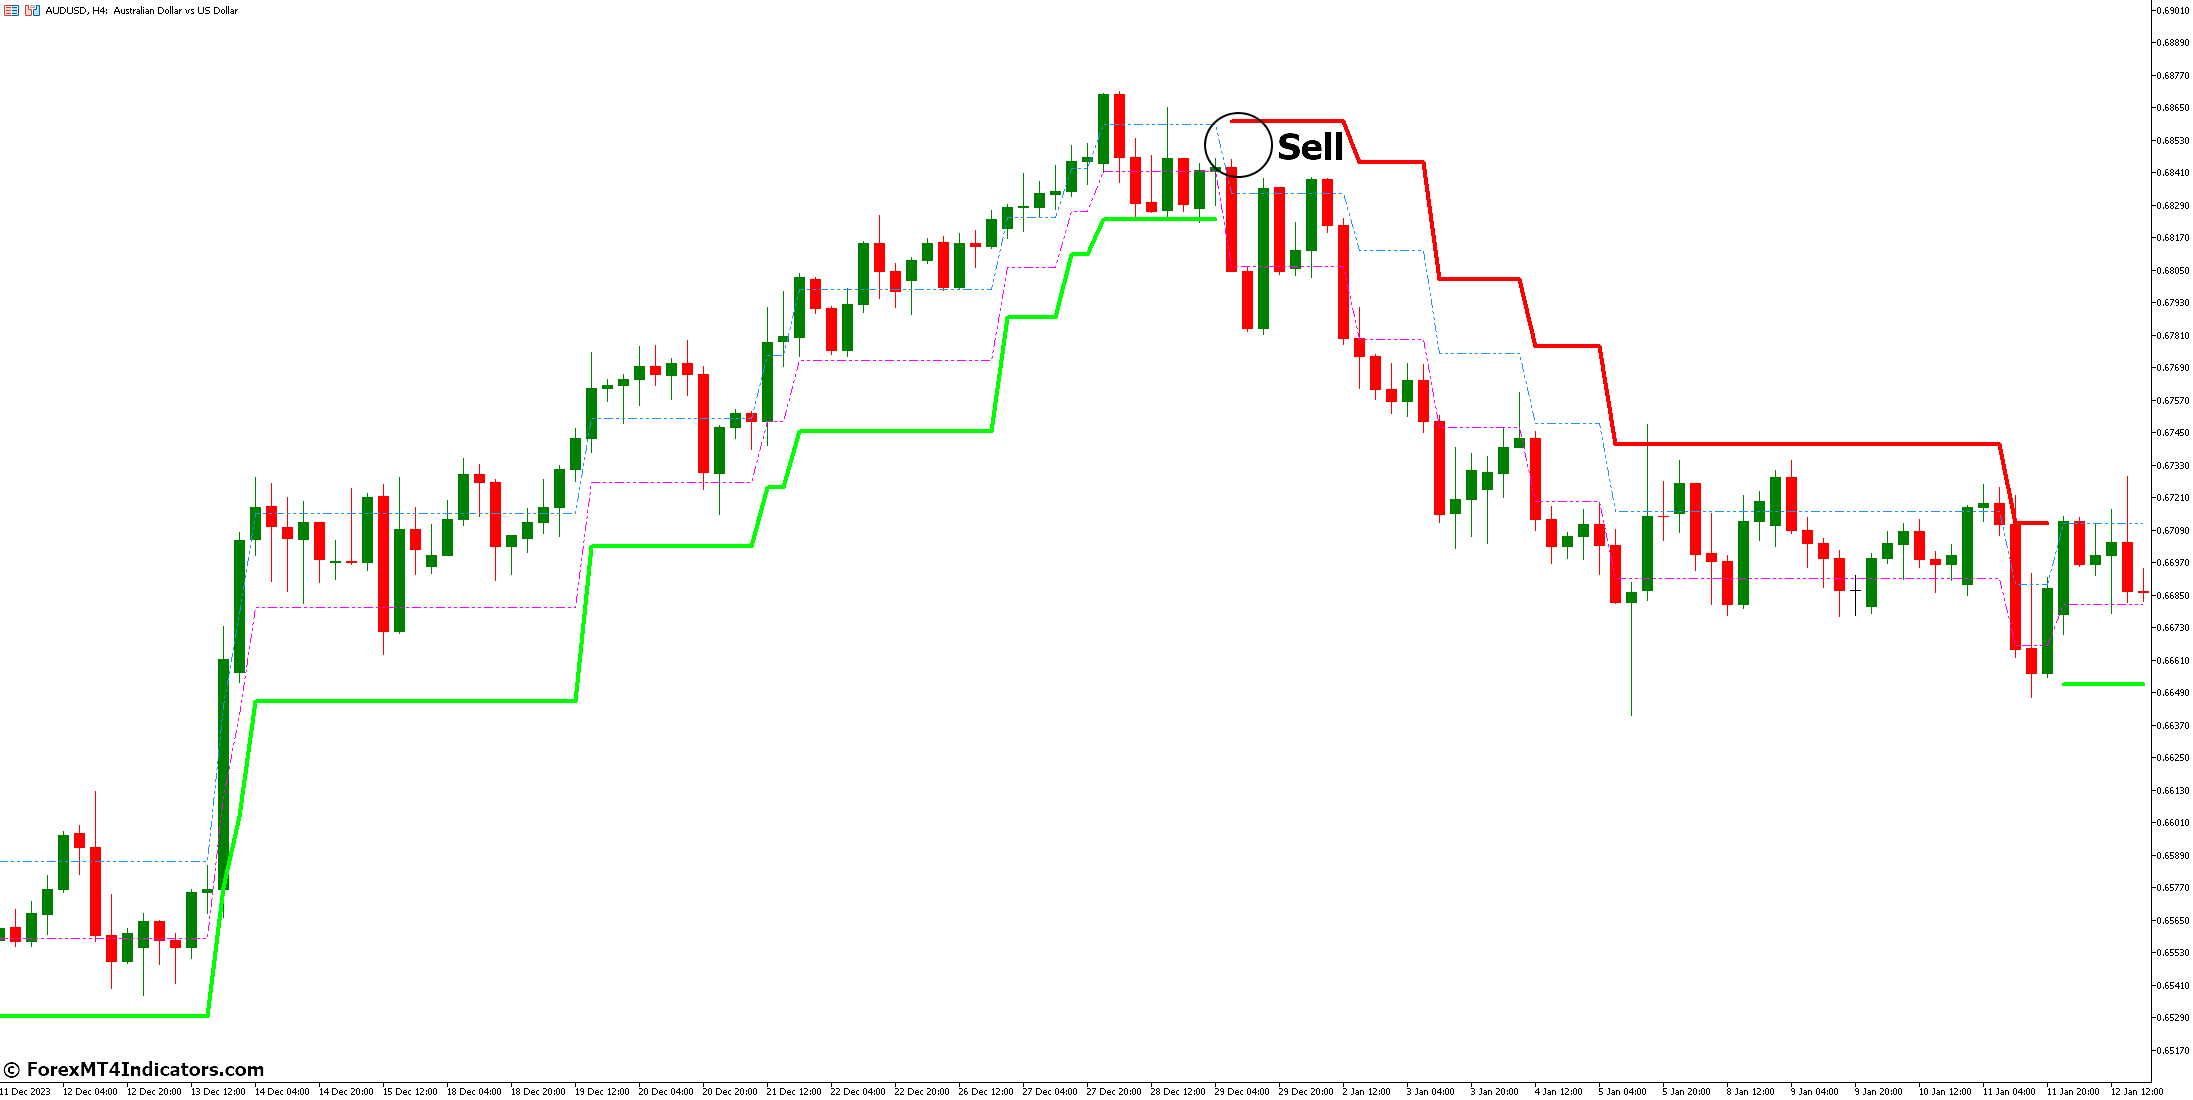 How to Trade with Adaptive Renko Indicator - Sell Entry